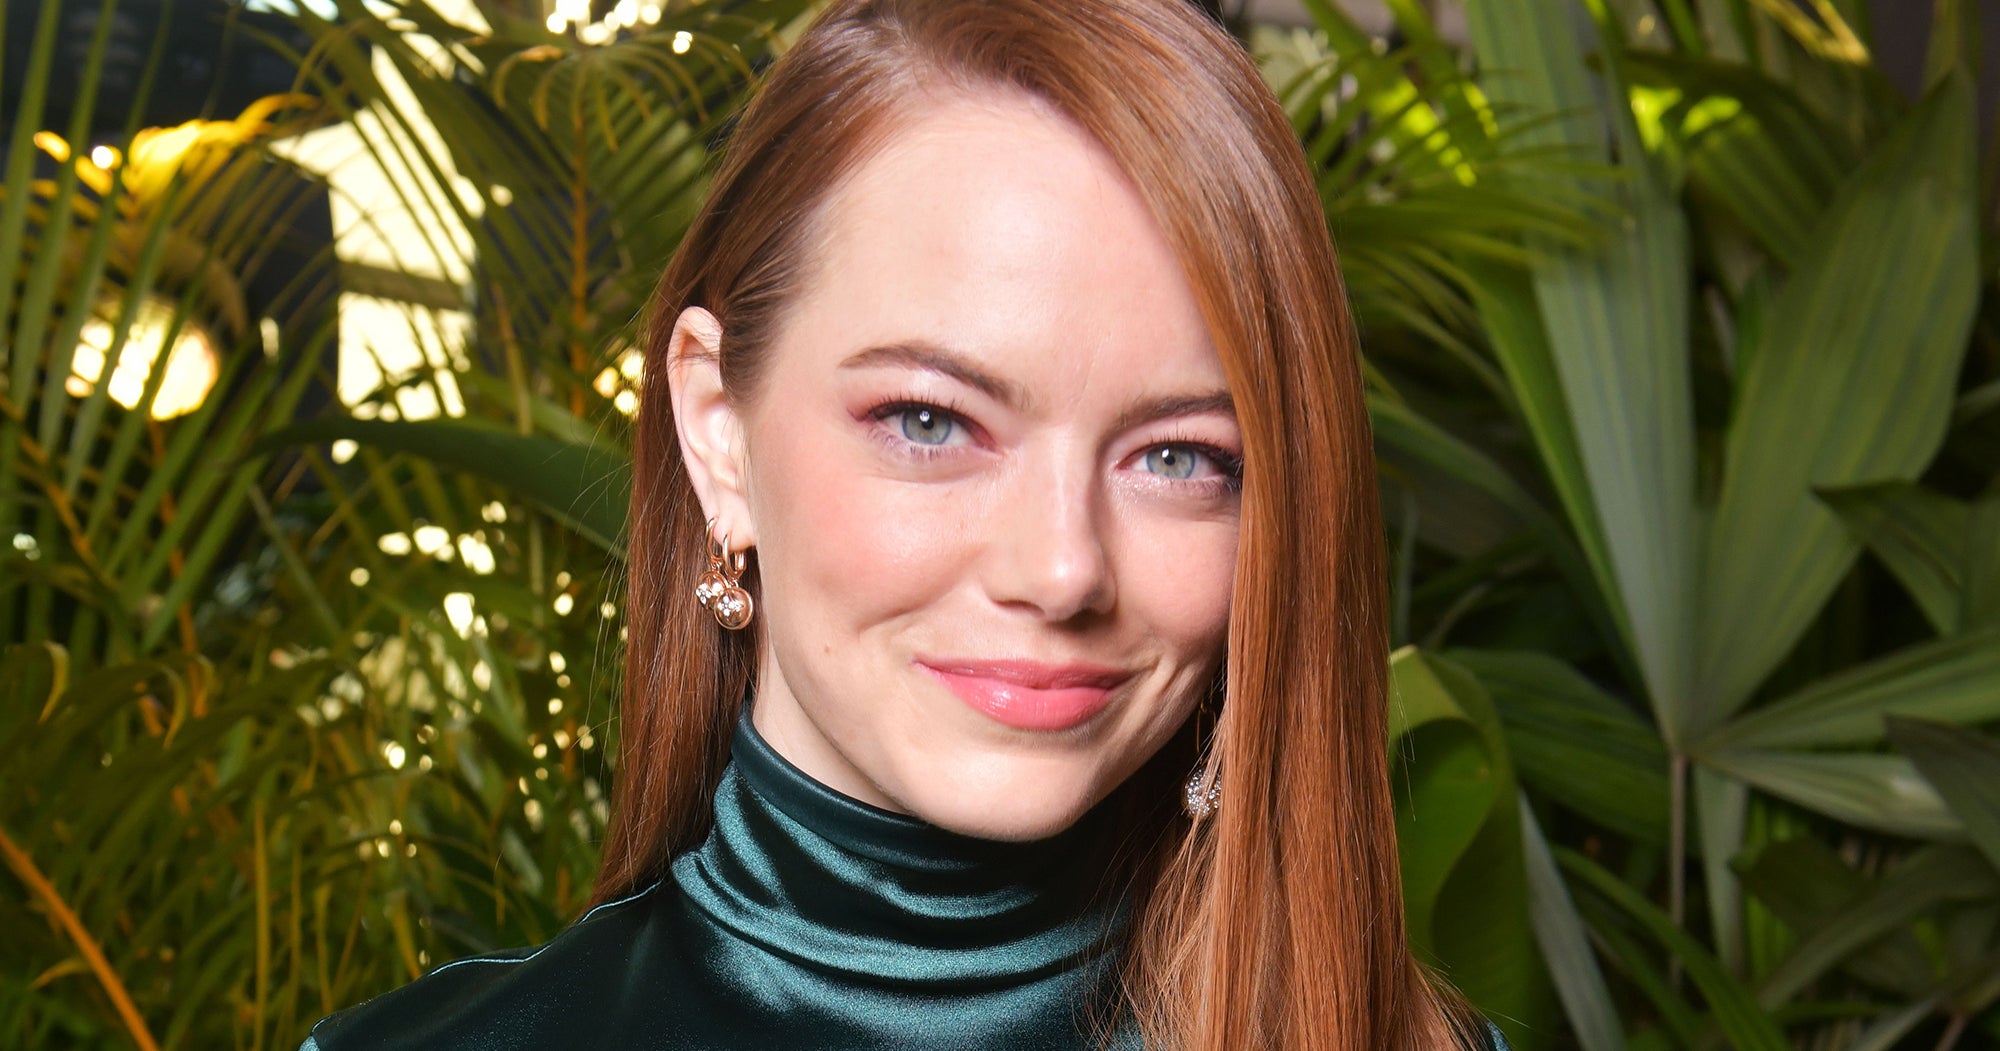 Emma Stone Is Wearing a Wedding Ring, Secretly Married Dave McCary